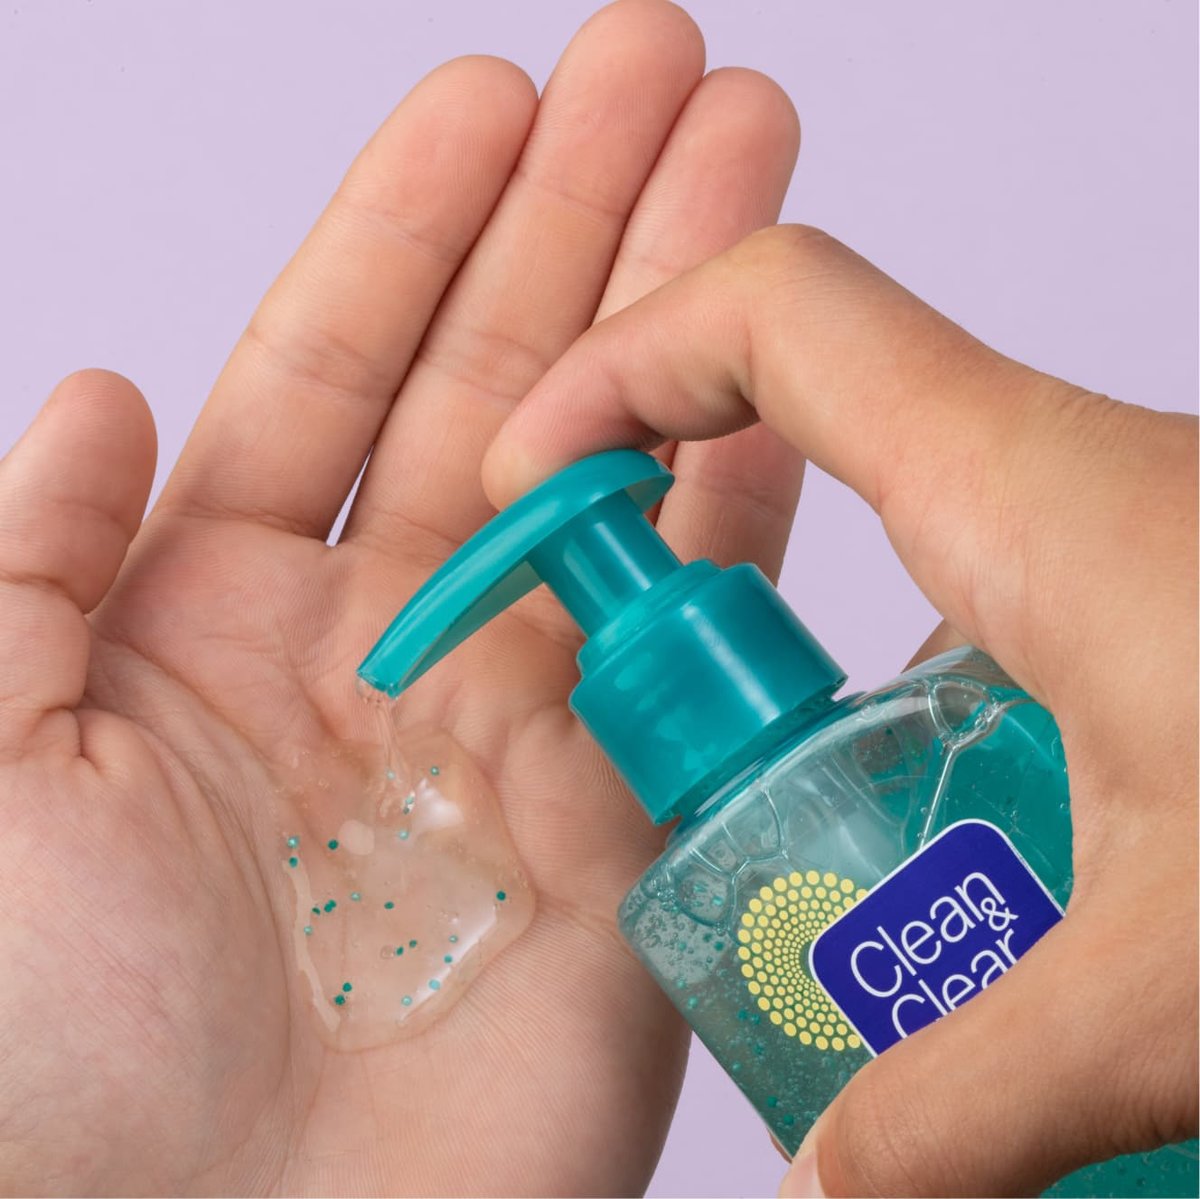 Clear with blue beads Clean & Clear Morning Burst hydrating facial cleanser being pumped into palm of hand in front of purple background